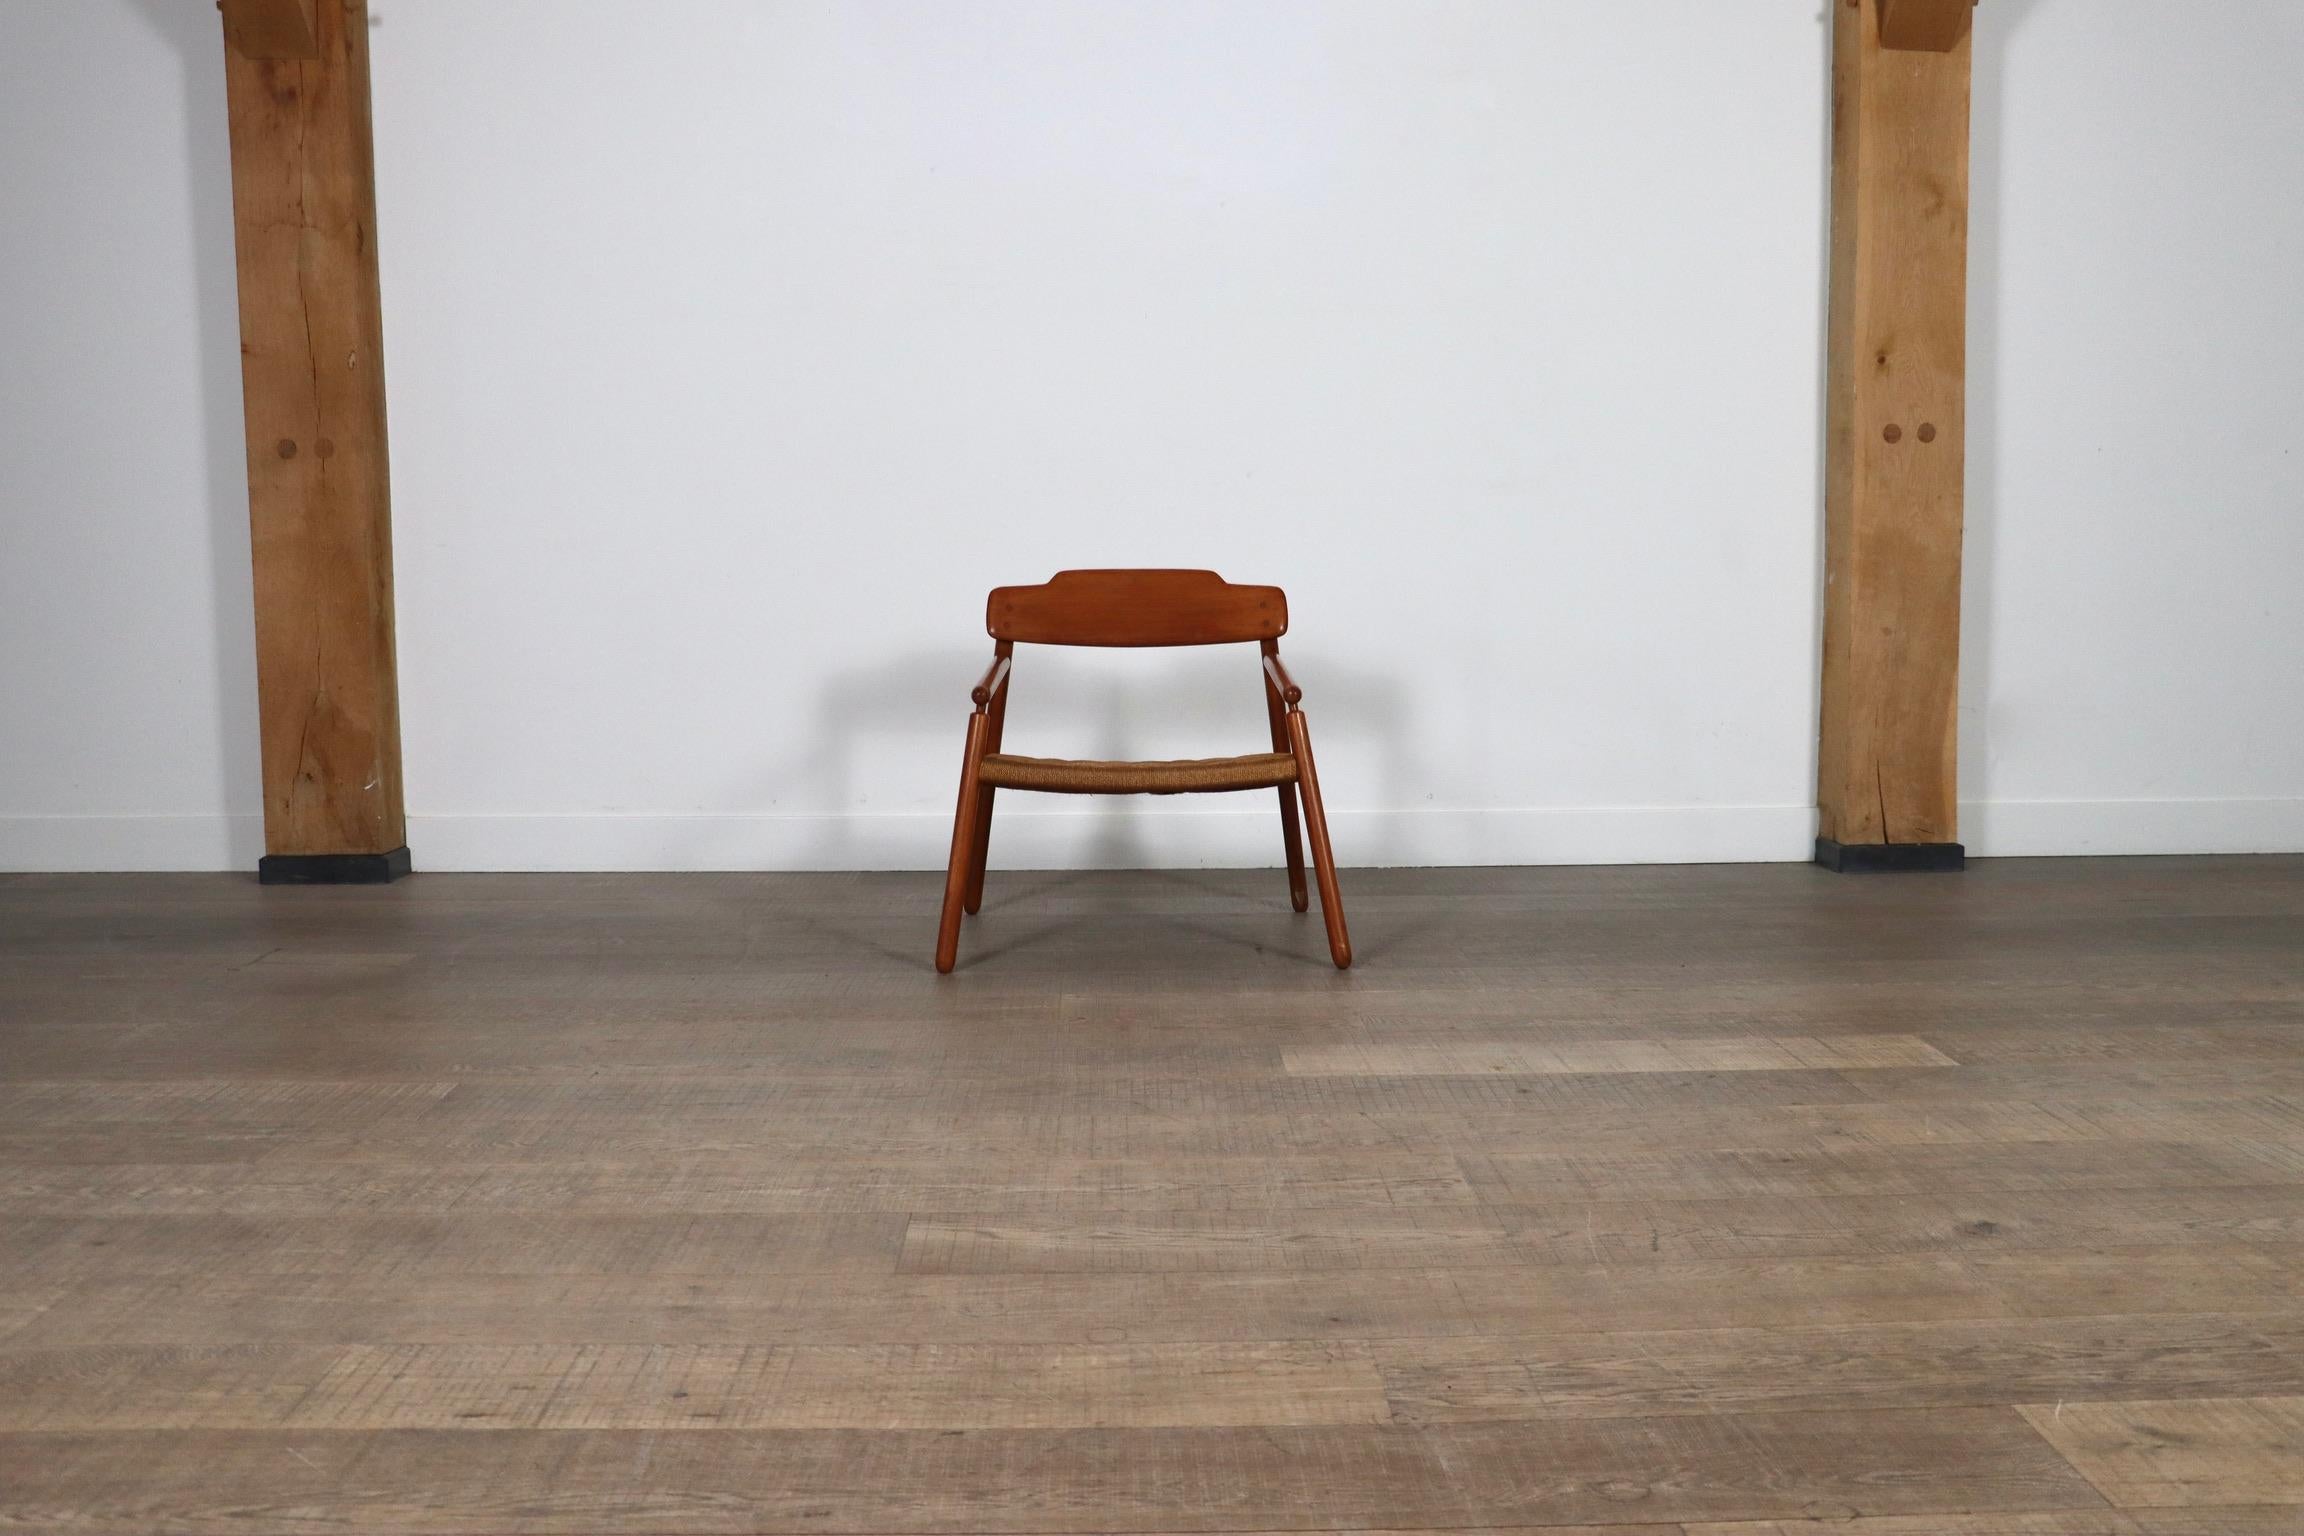 Midcentury Minimalistic Easy Chair In Oak And Papercord, Finland 1950s For Sale 4